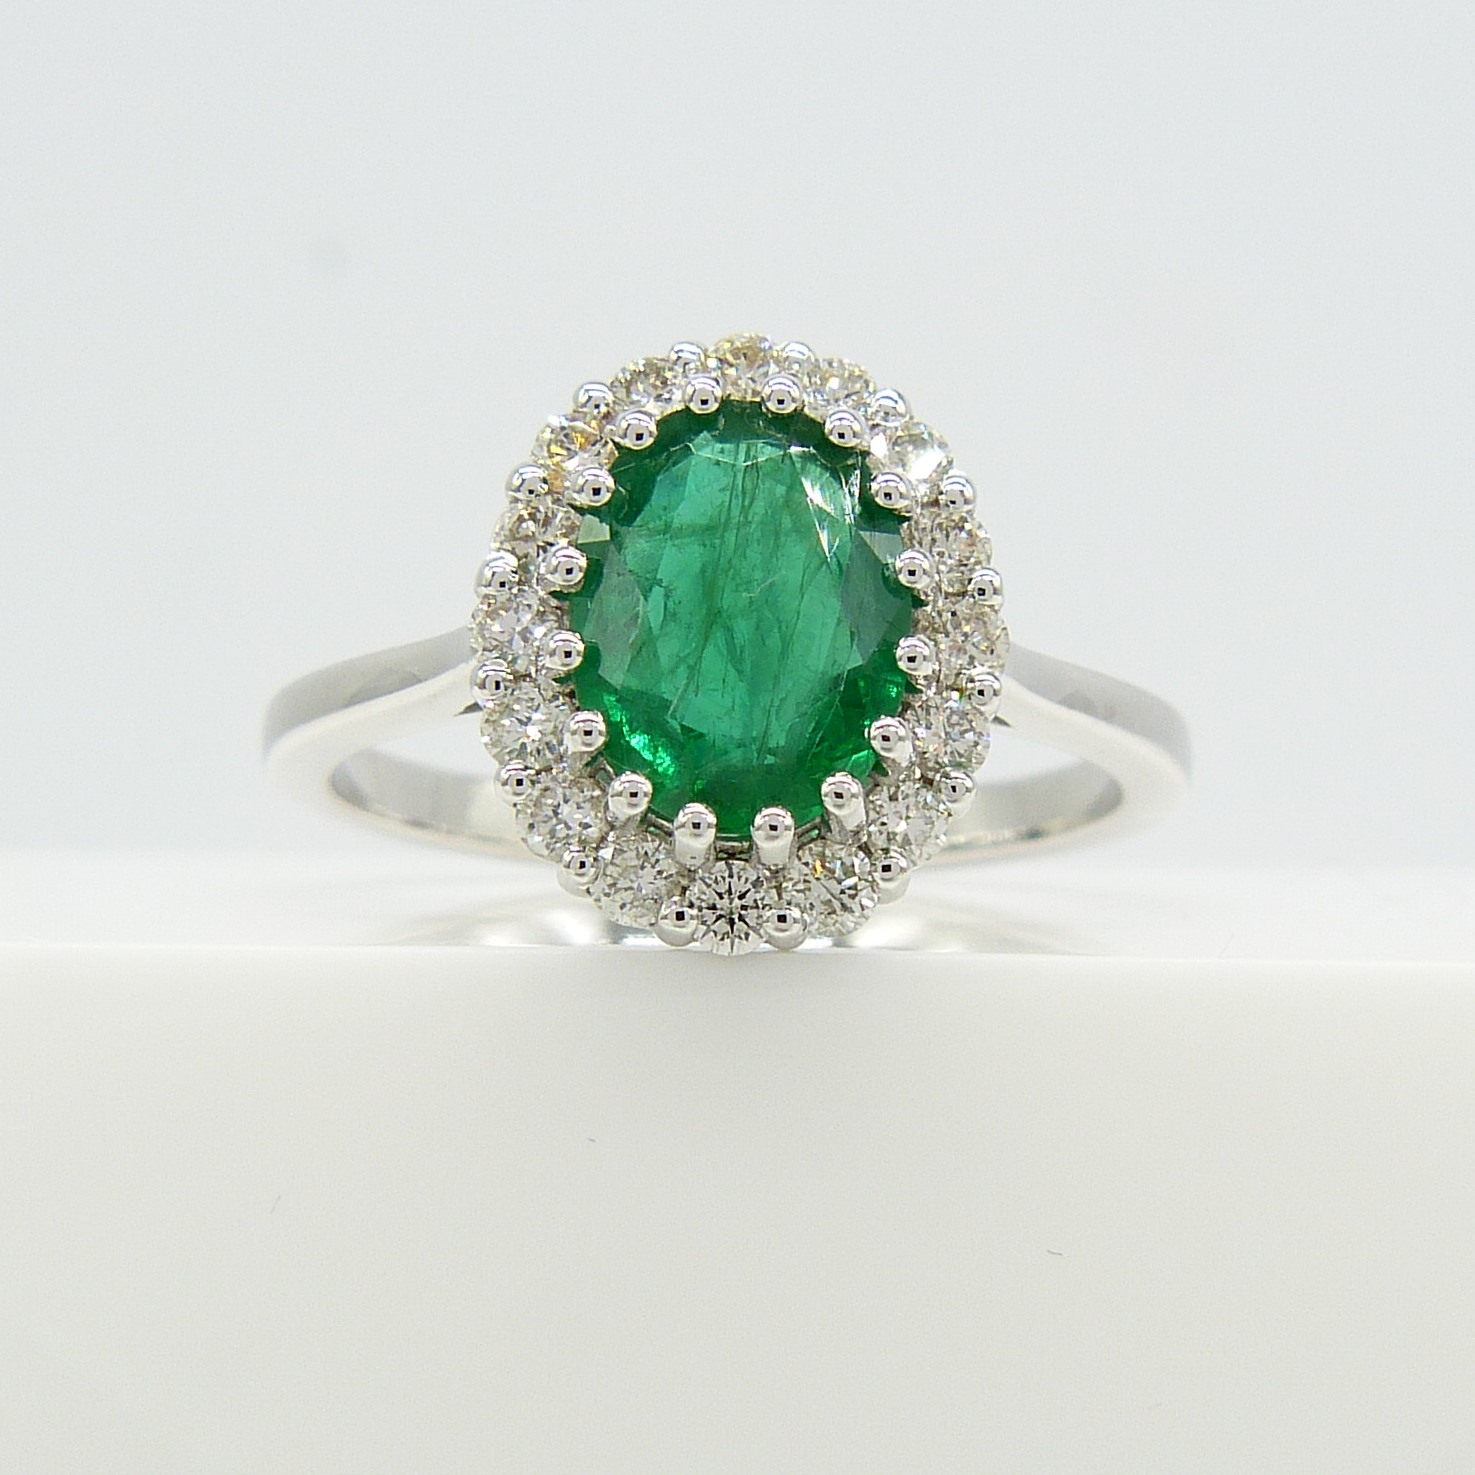 18ct white gold oval emerald and diamond cluster ring - Image 5 of 8